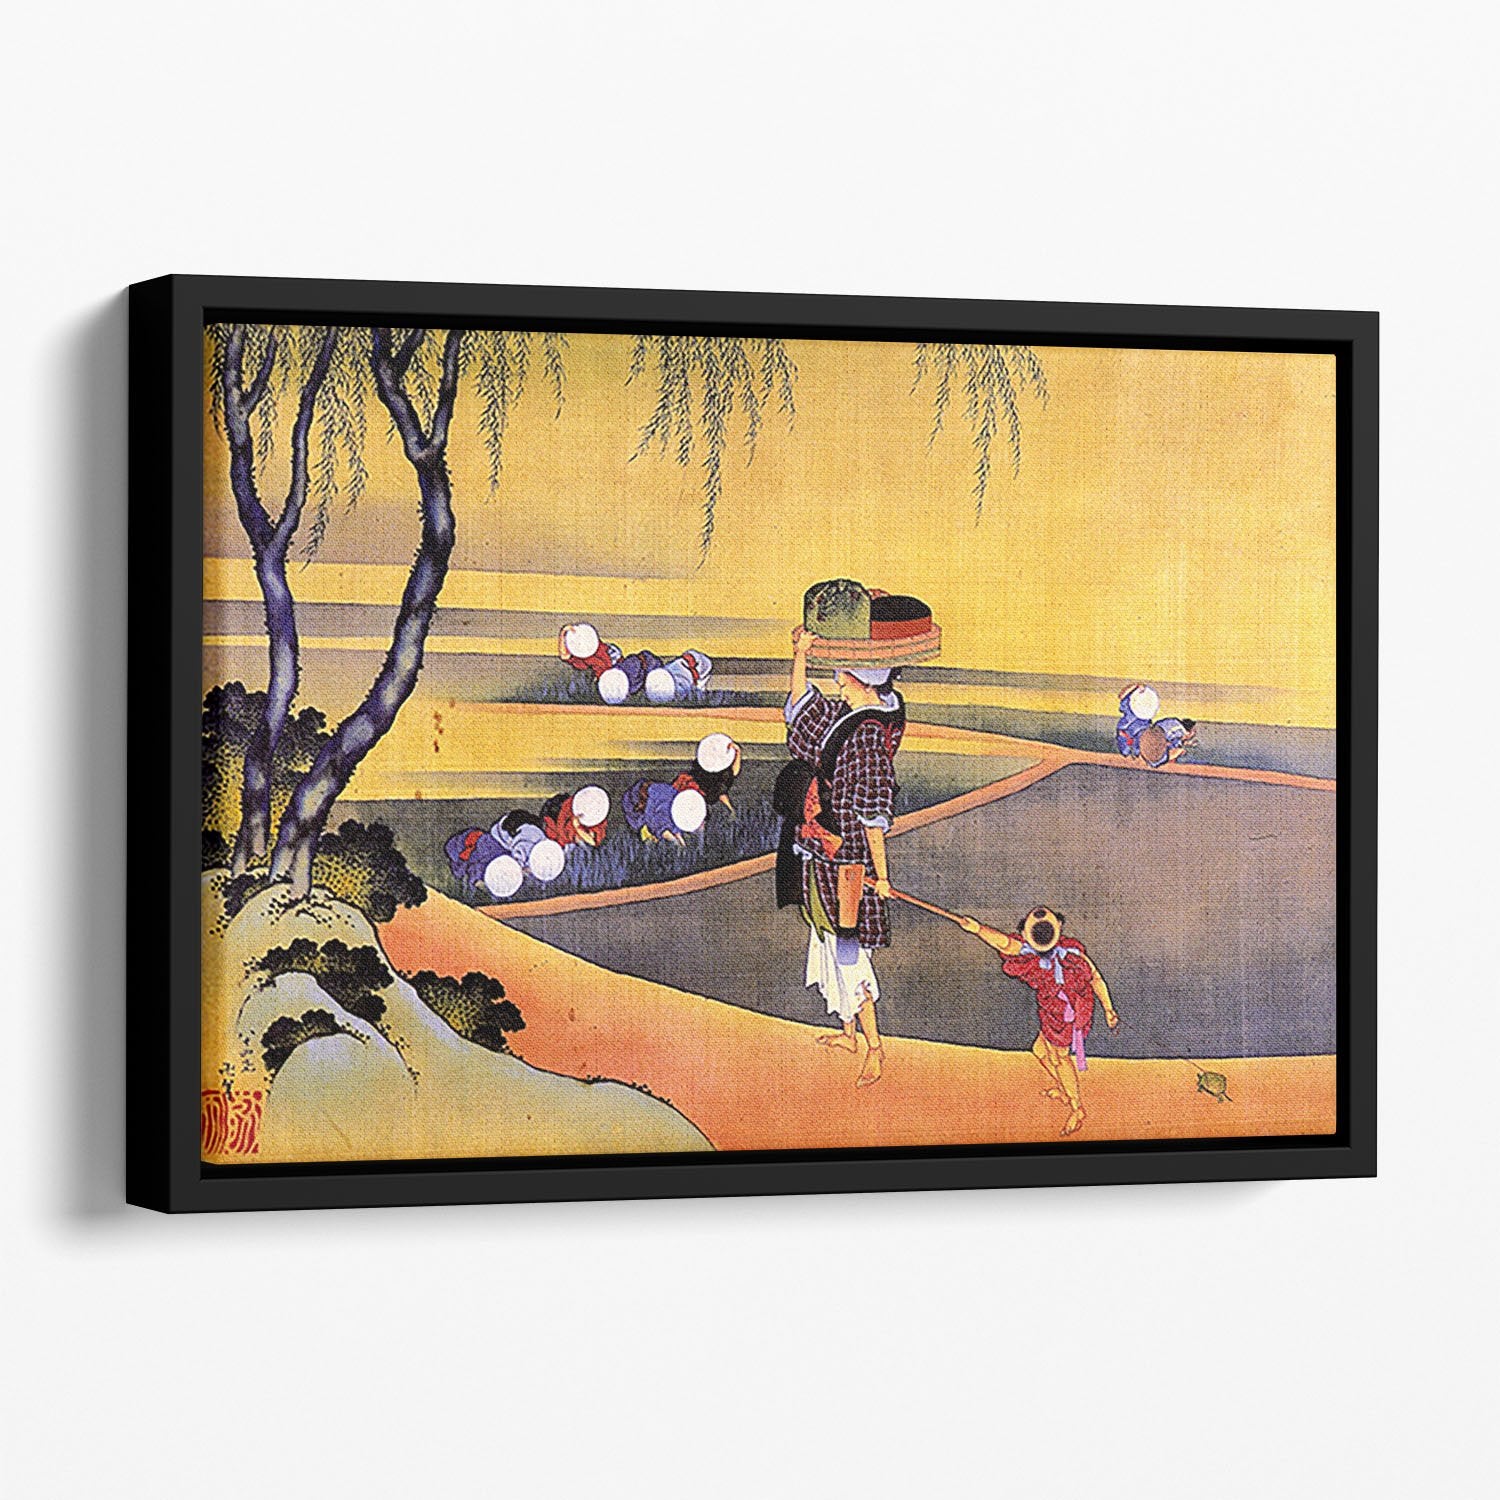 Rice fields by Hokusai Floating Framed Canvas